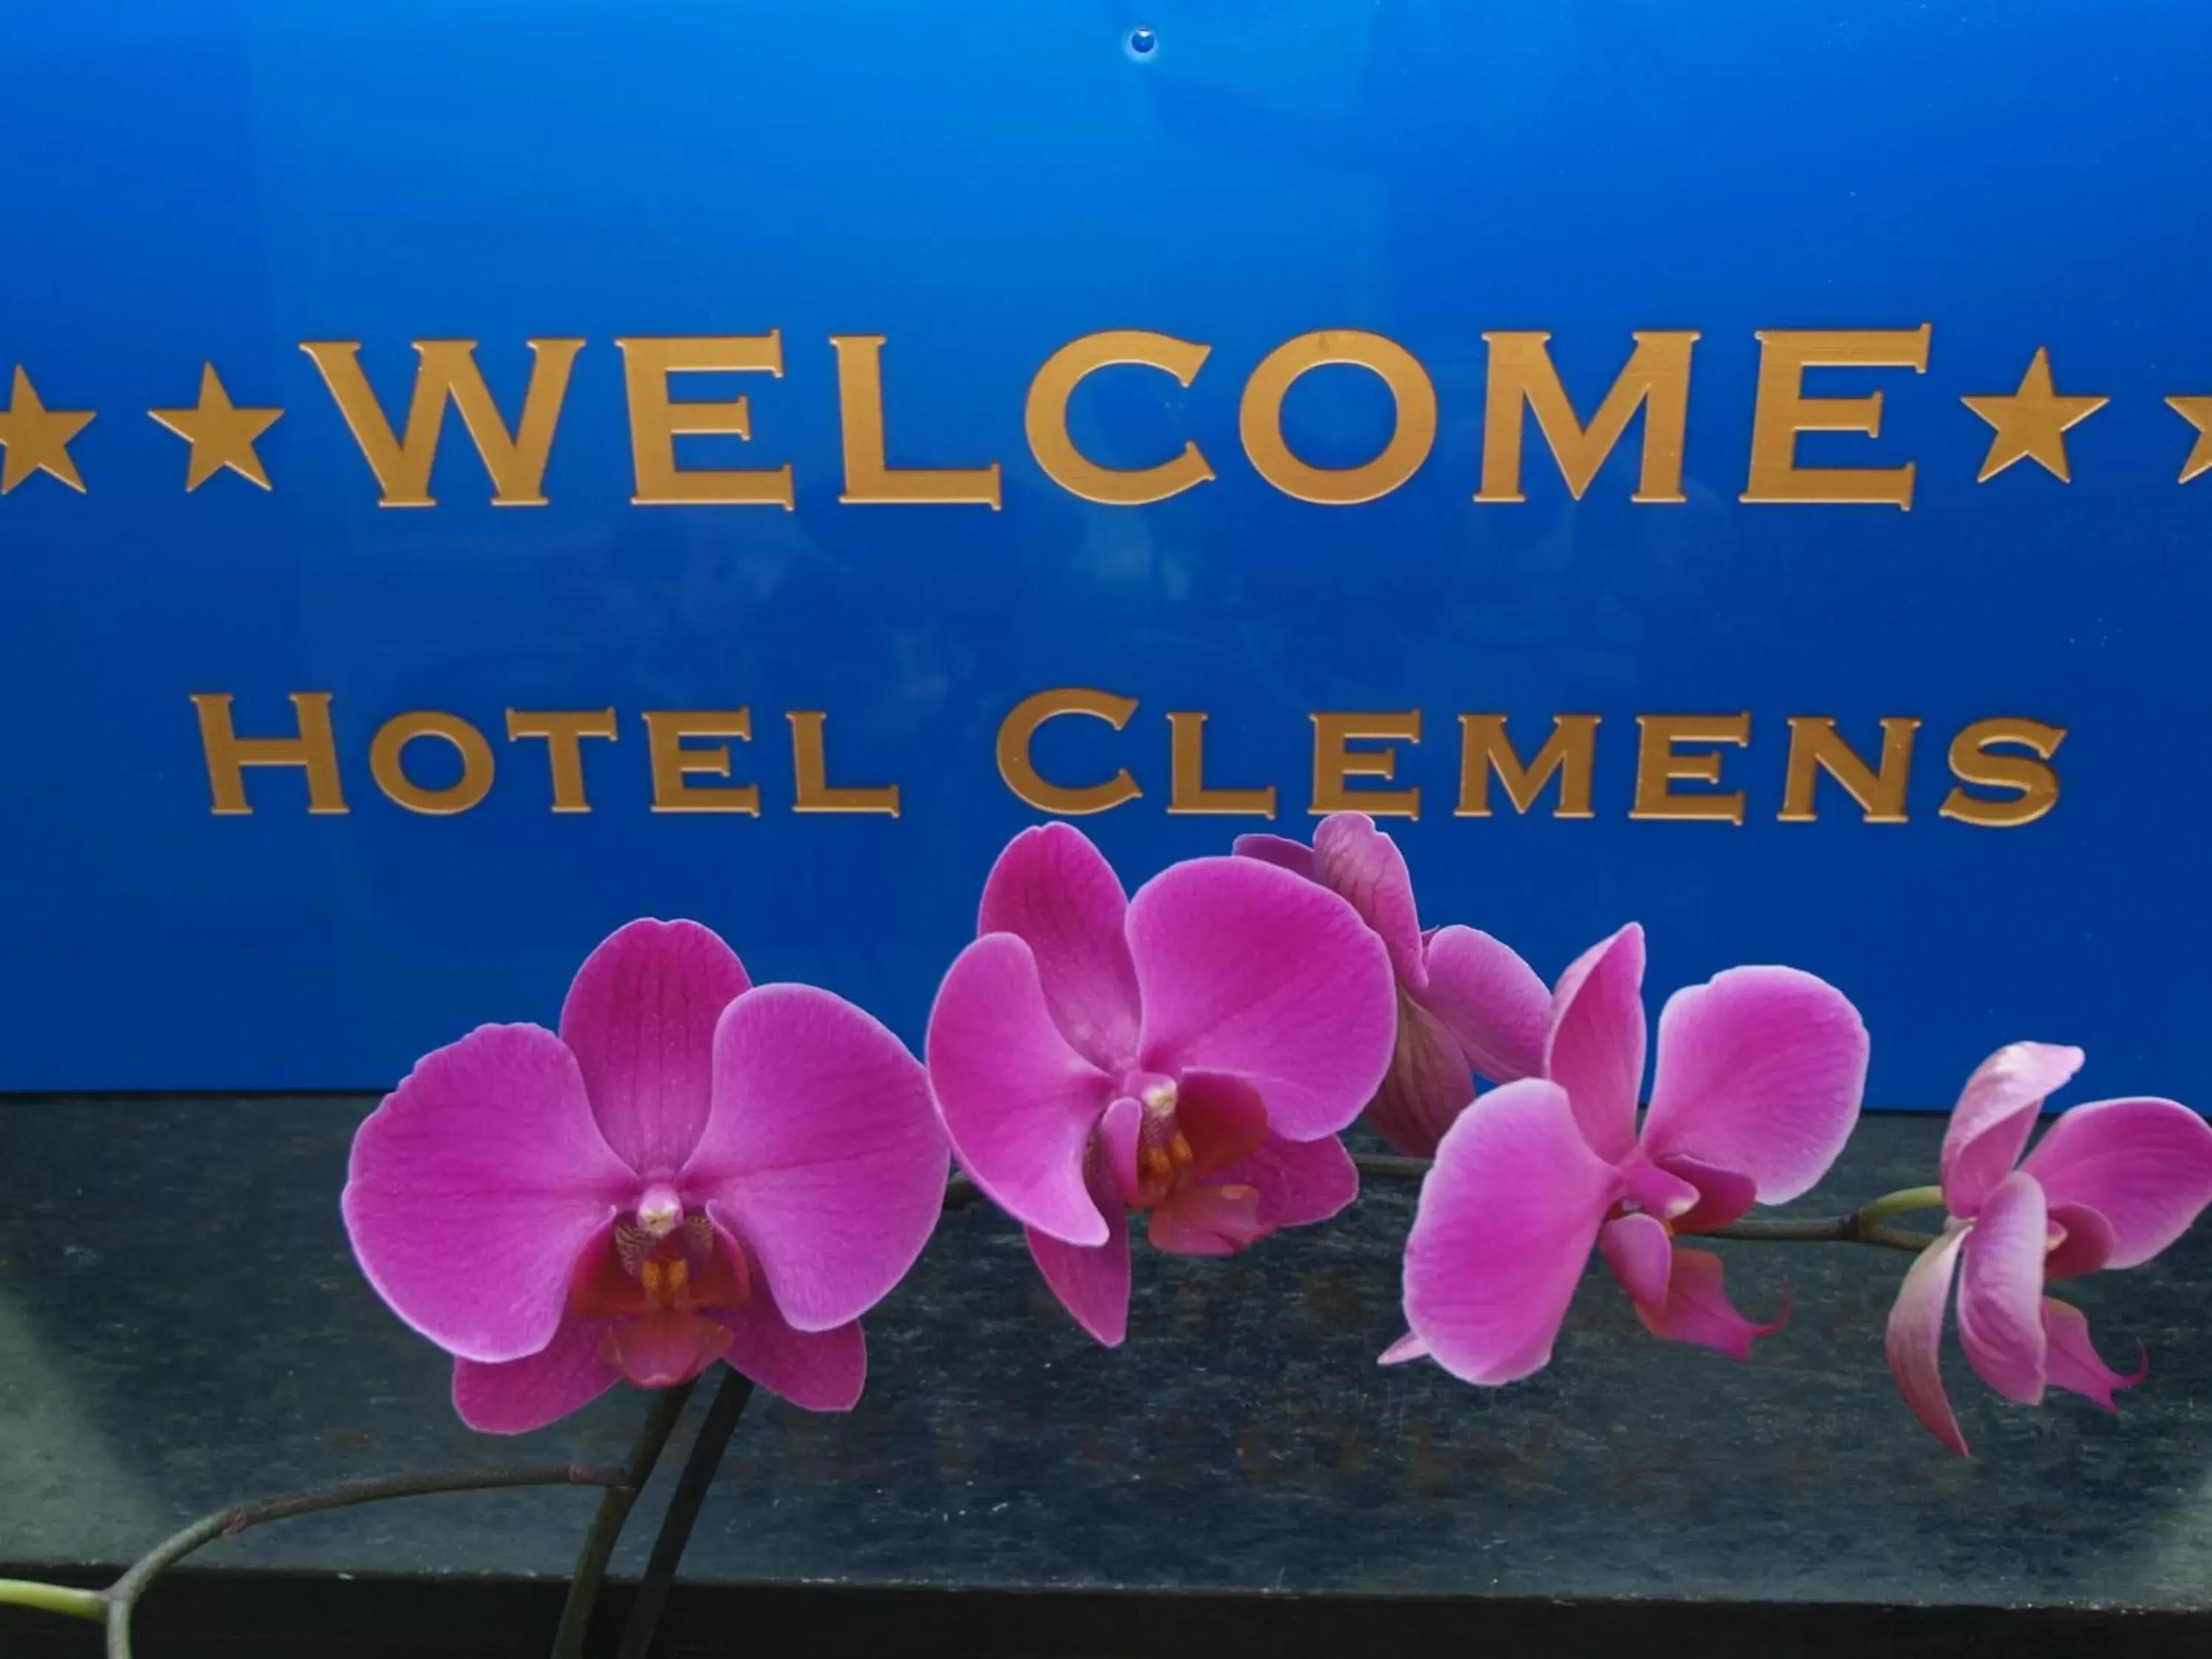 Logo/Certificate/Sign in Hotel Clemens